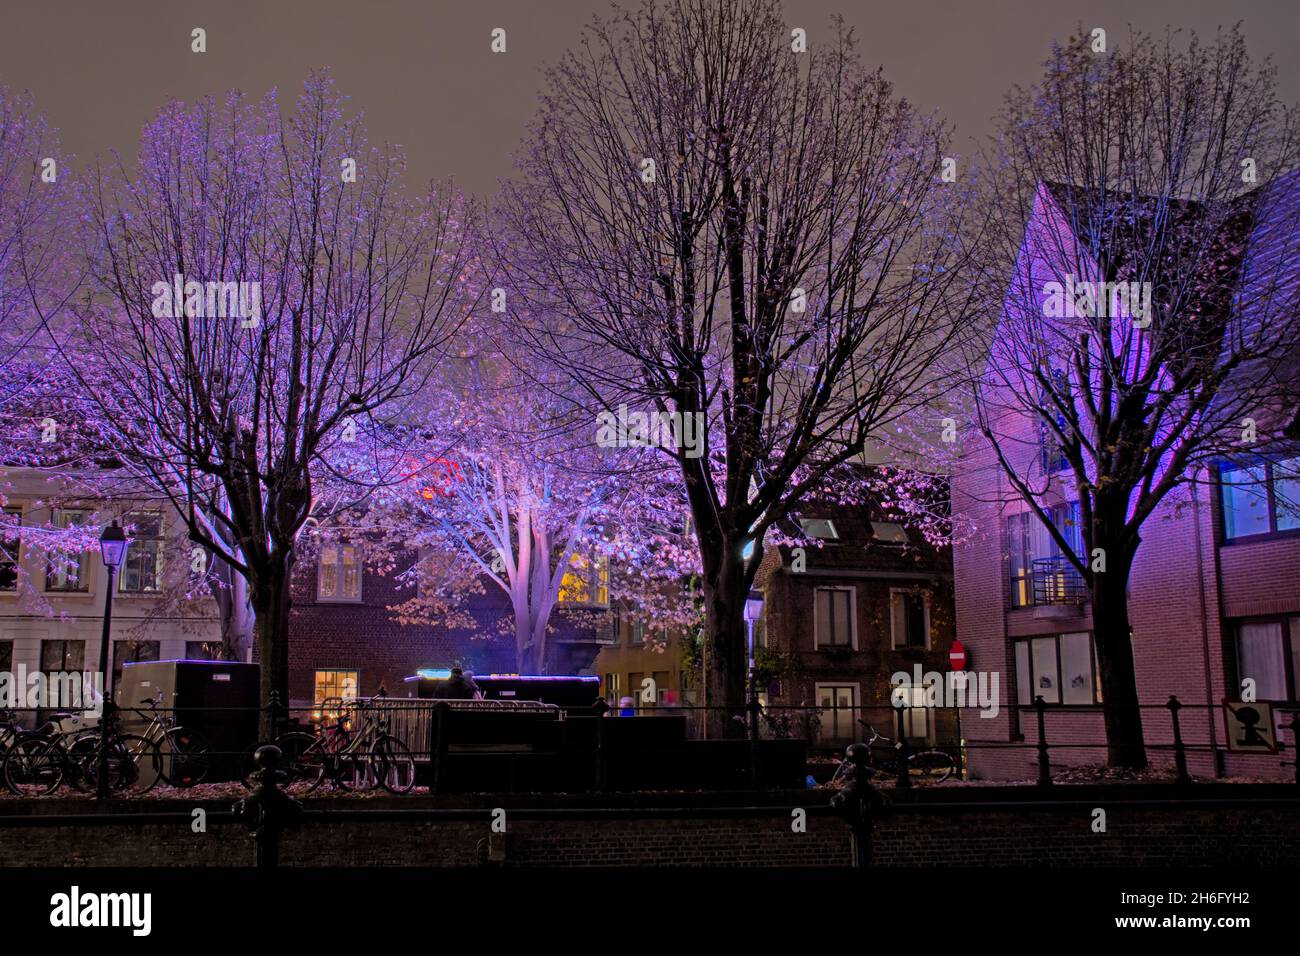 `Still entity`, part of Ghent light festival 2021. Trees and houses in colourfull light at night Stock Photo